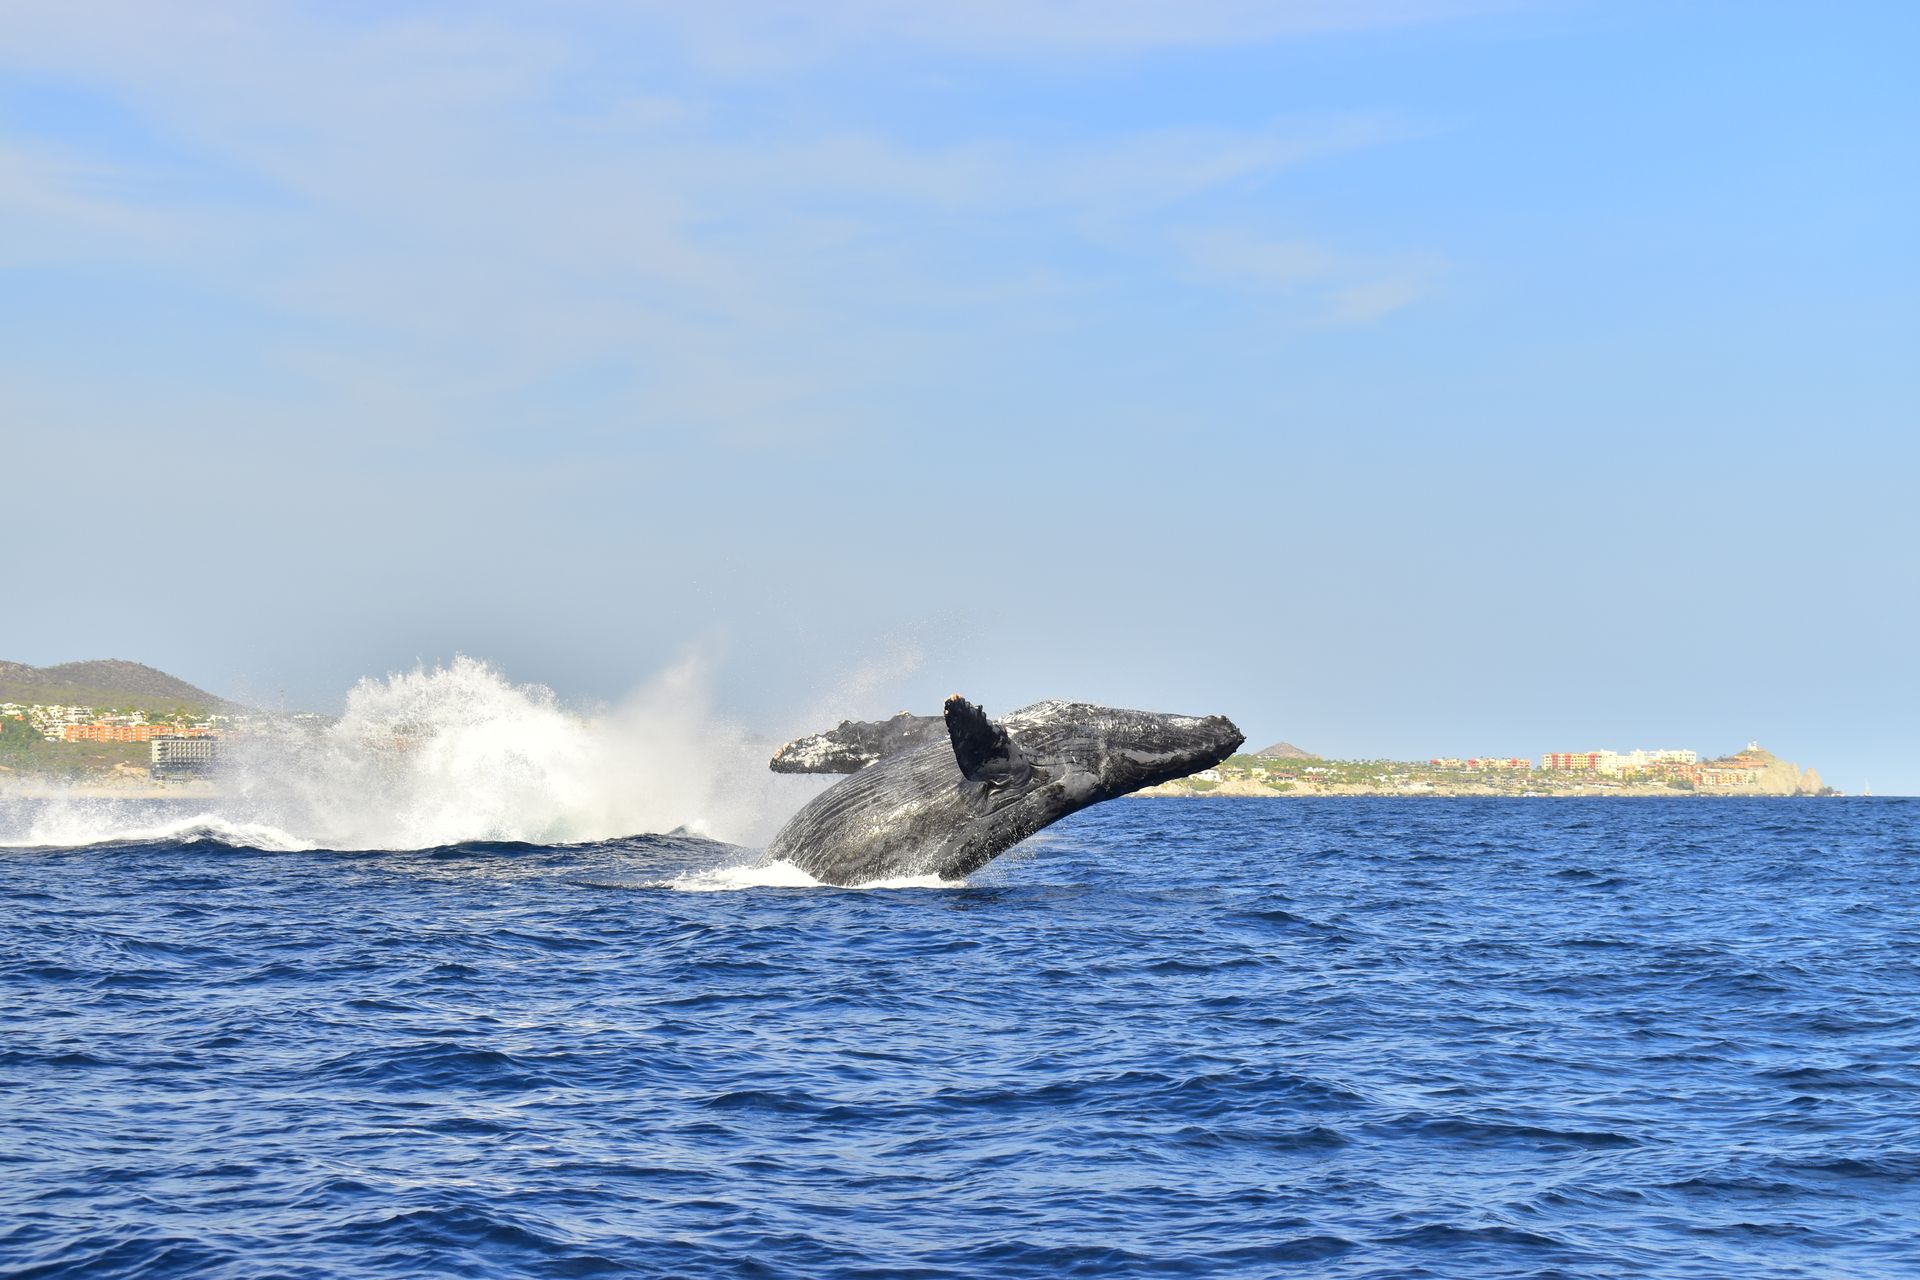 A humpback whale is jumping out of the ocean.